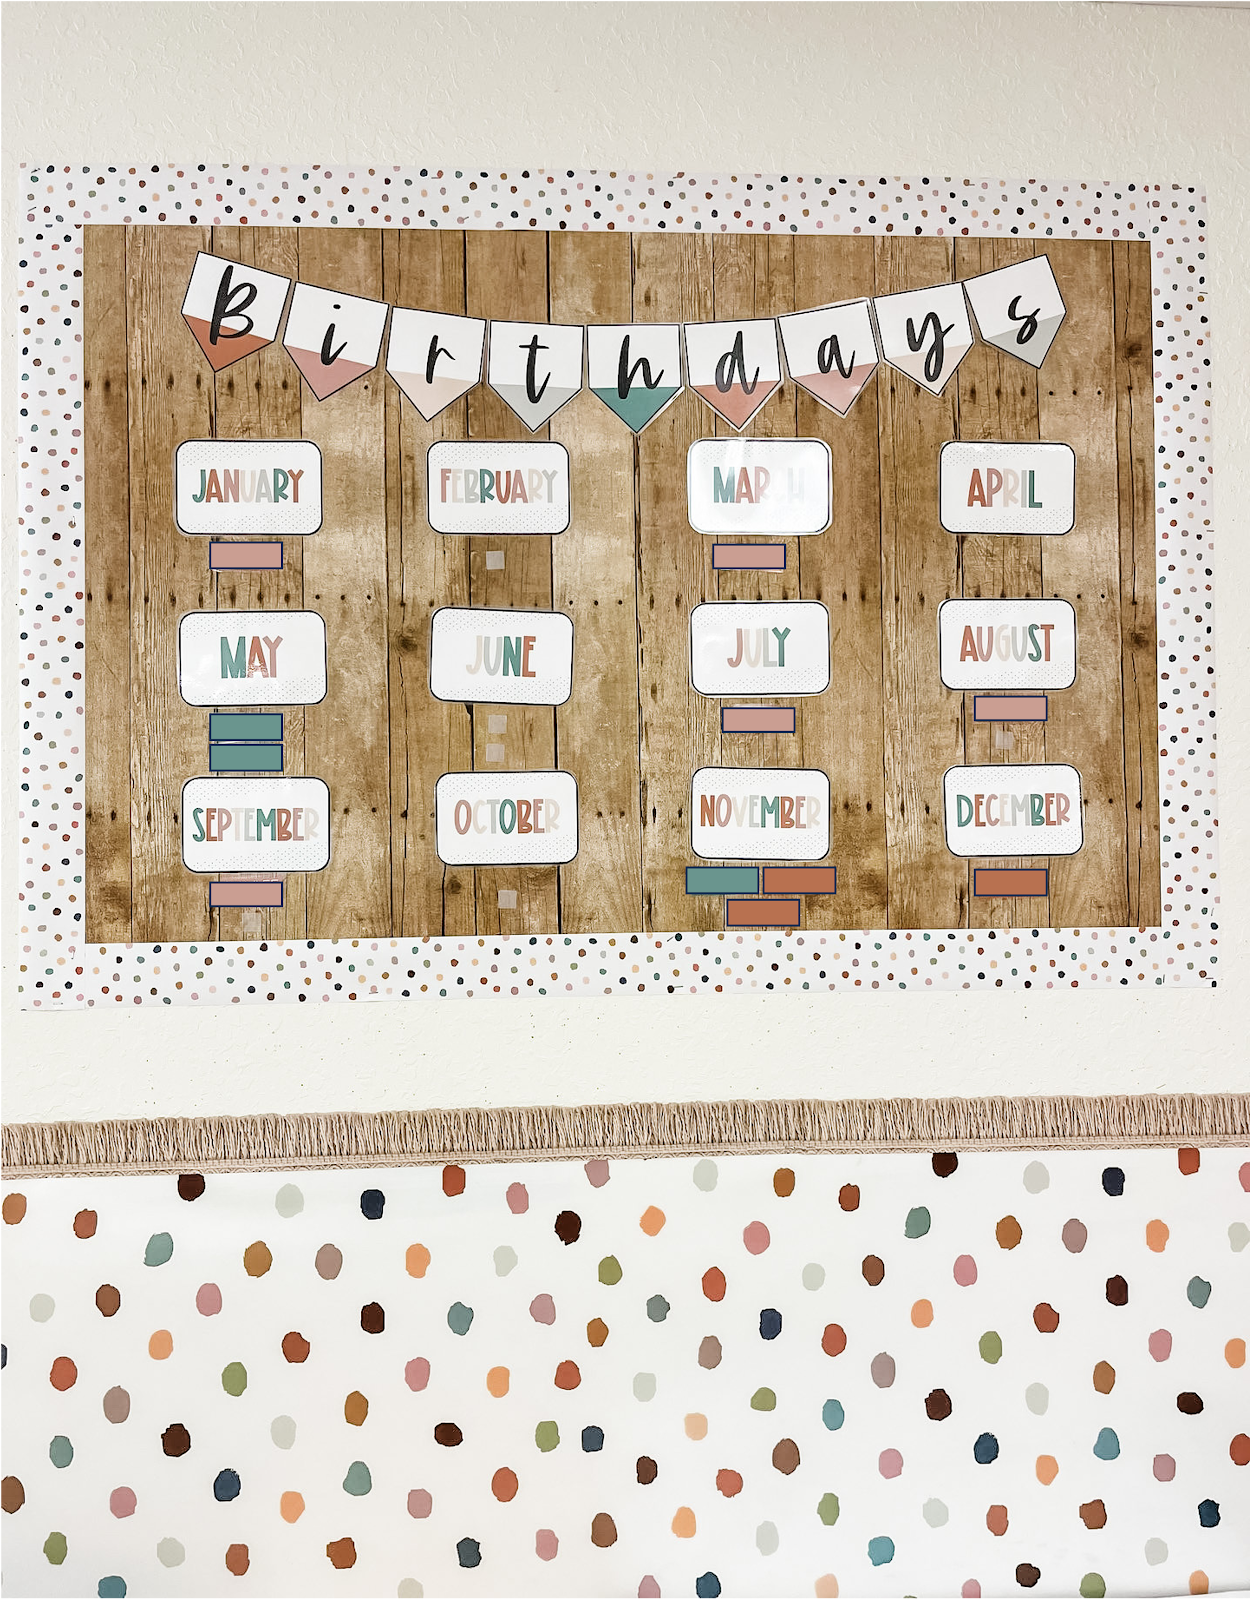 This image shows a bulletin board display with a heading reading "Birthdays". There is a card for each month of the year with smaller cards for student names underneath. The letters on the month cards are in simple, neutral colors. 